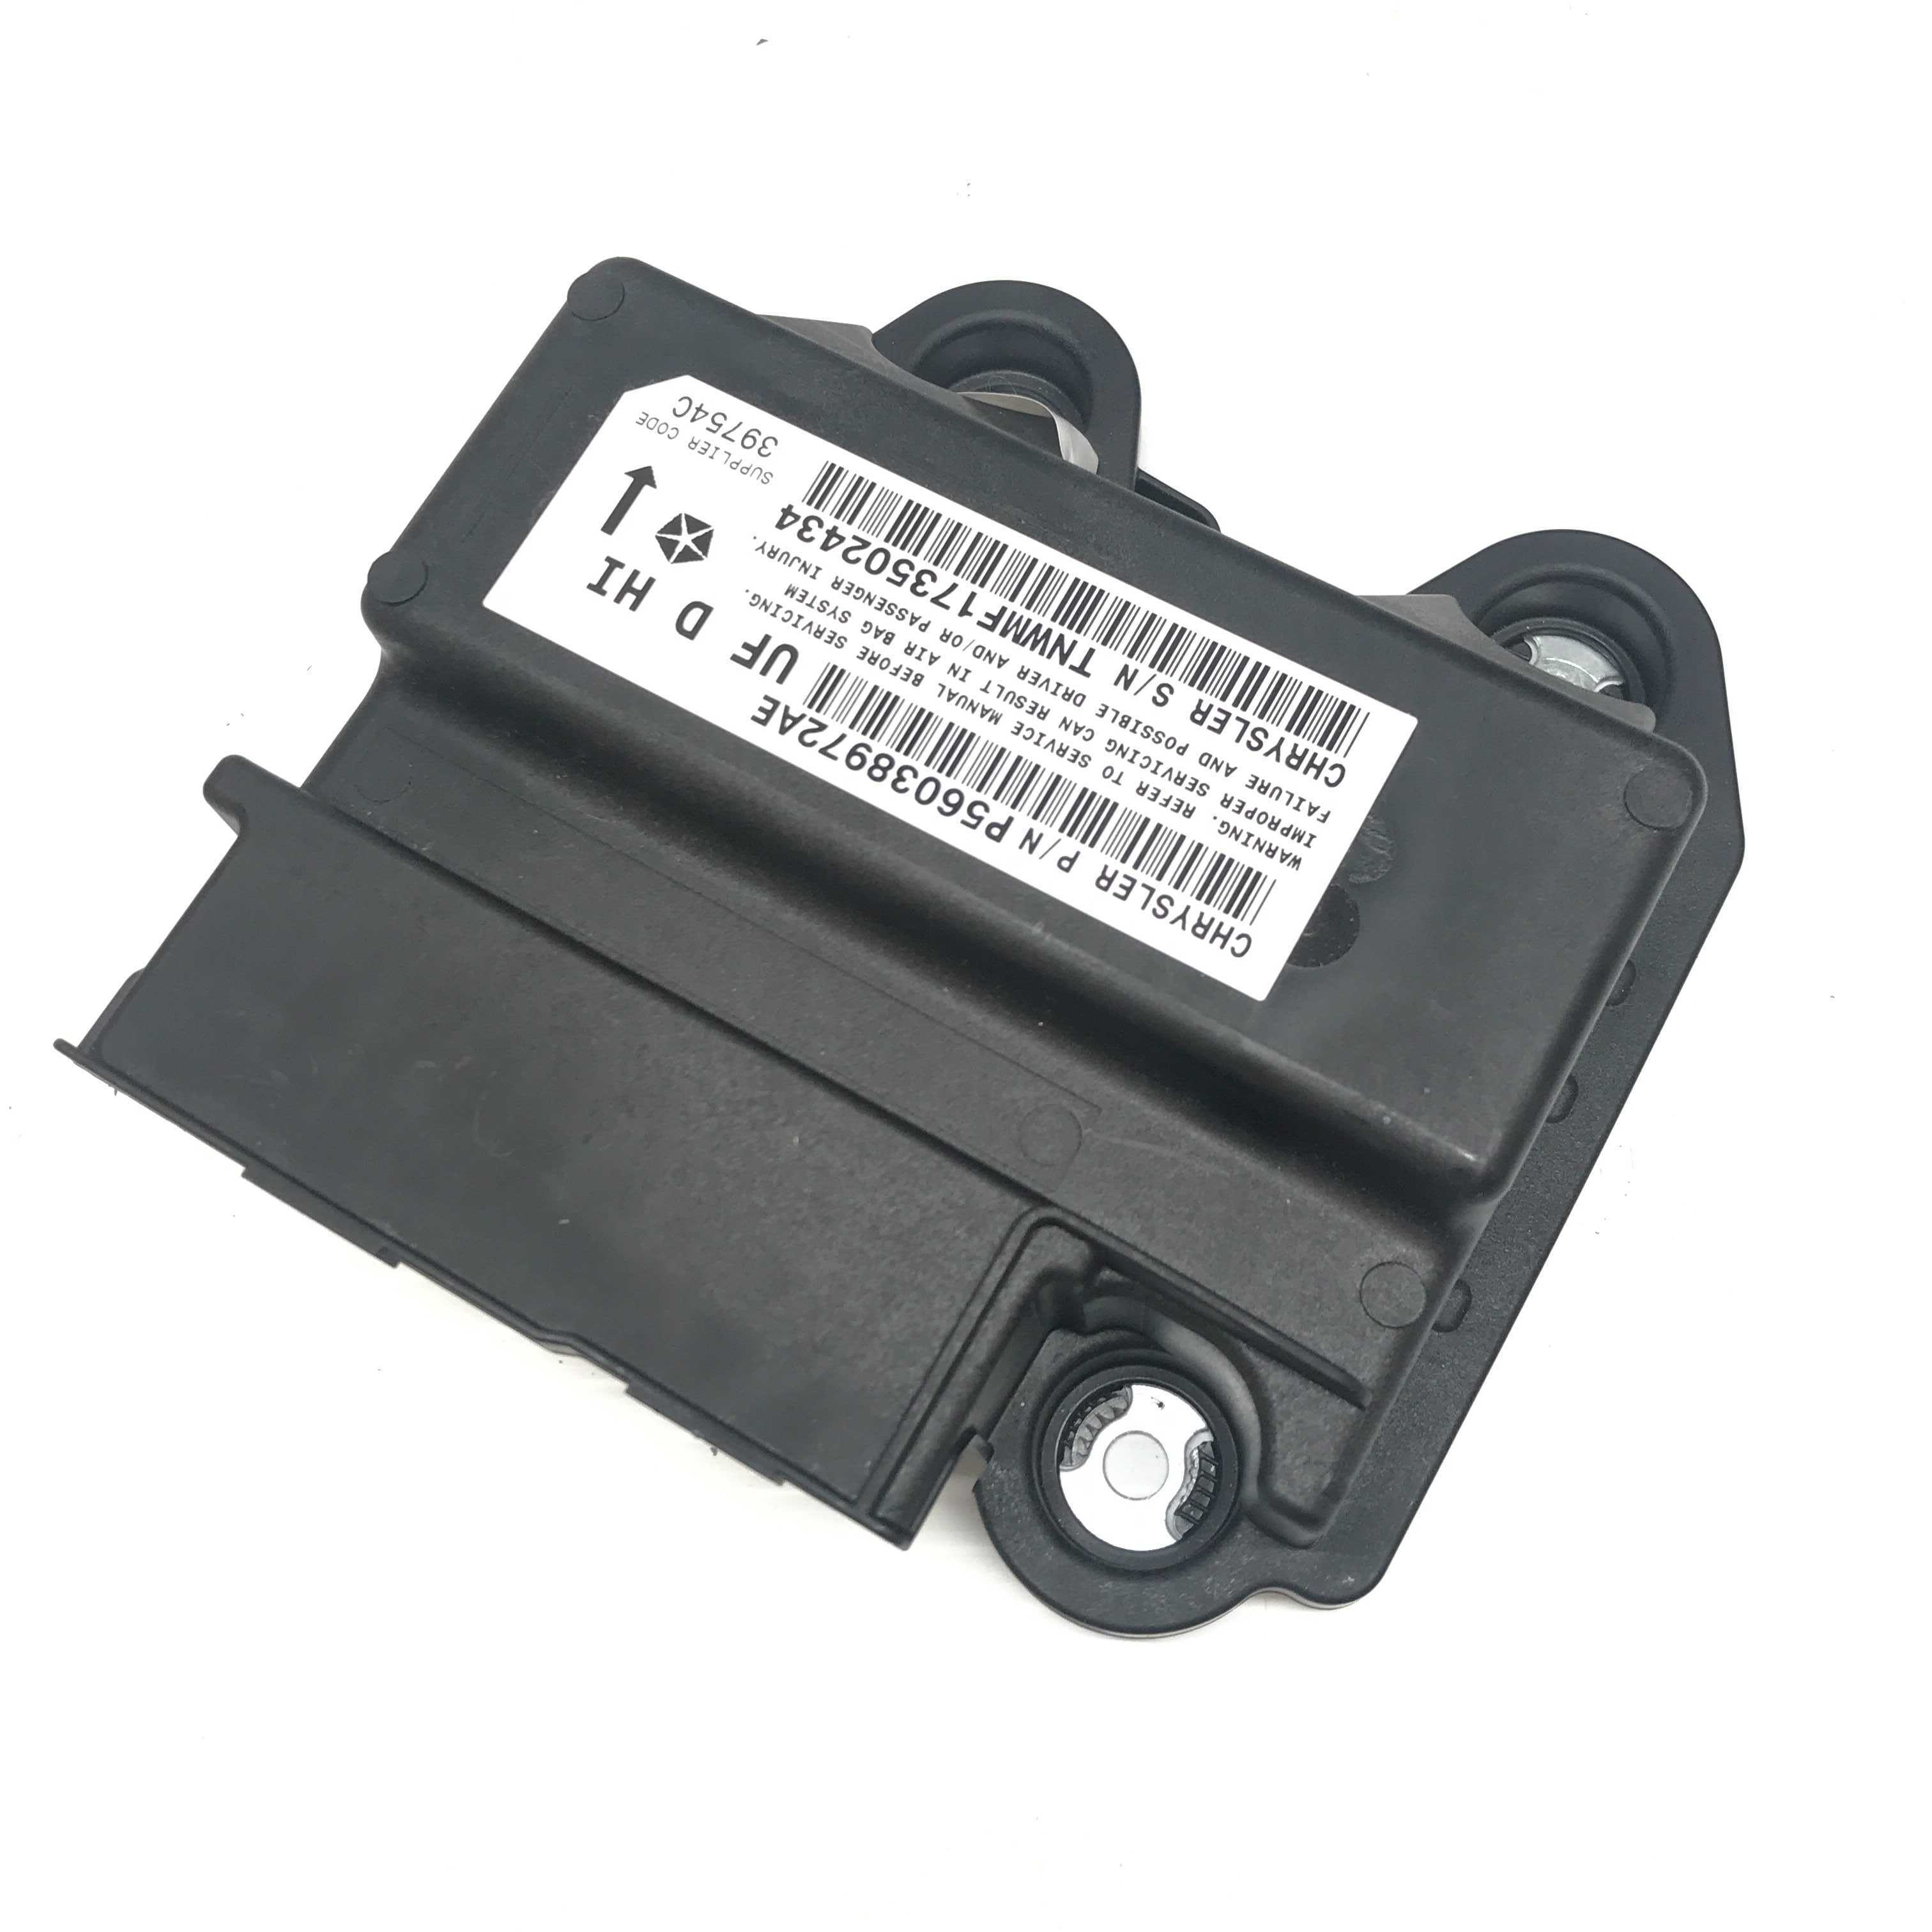 CHRYSLER 200 SRS ORC ORM Occupant Control Module - Airbag Computer Control Module PART #P56038972AE